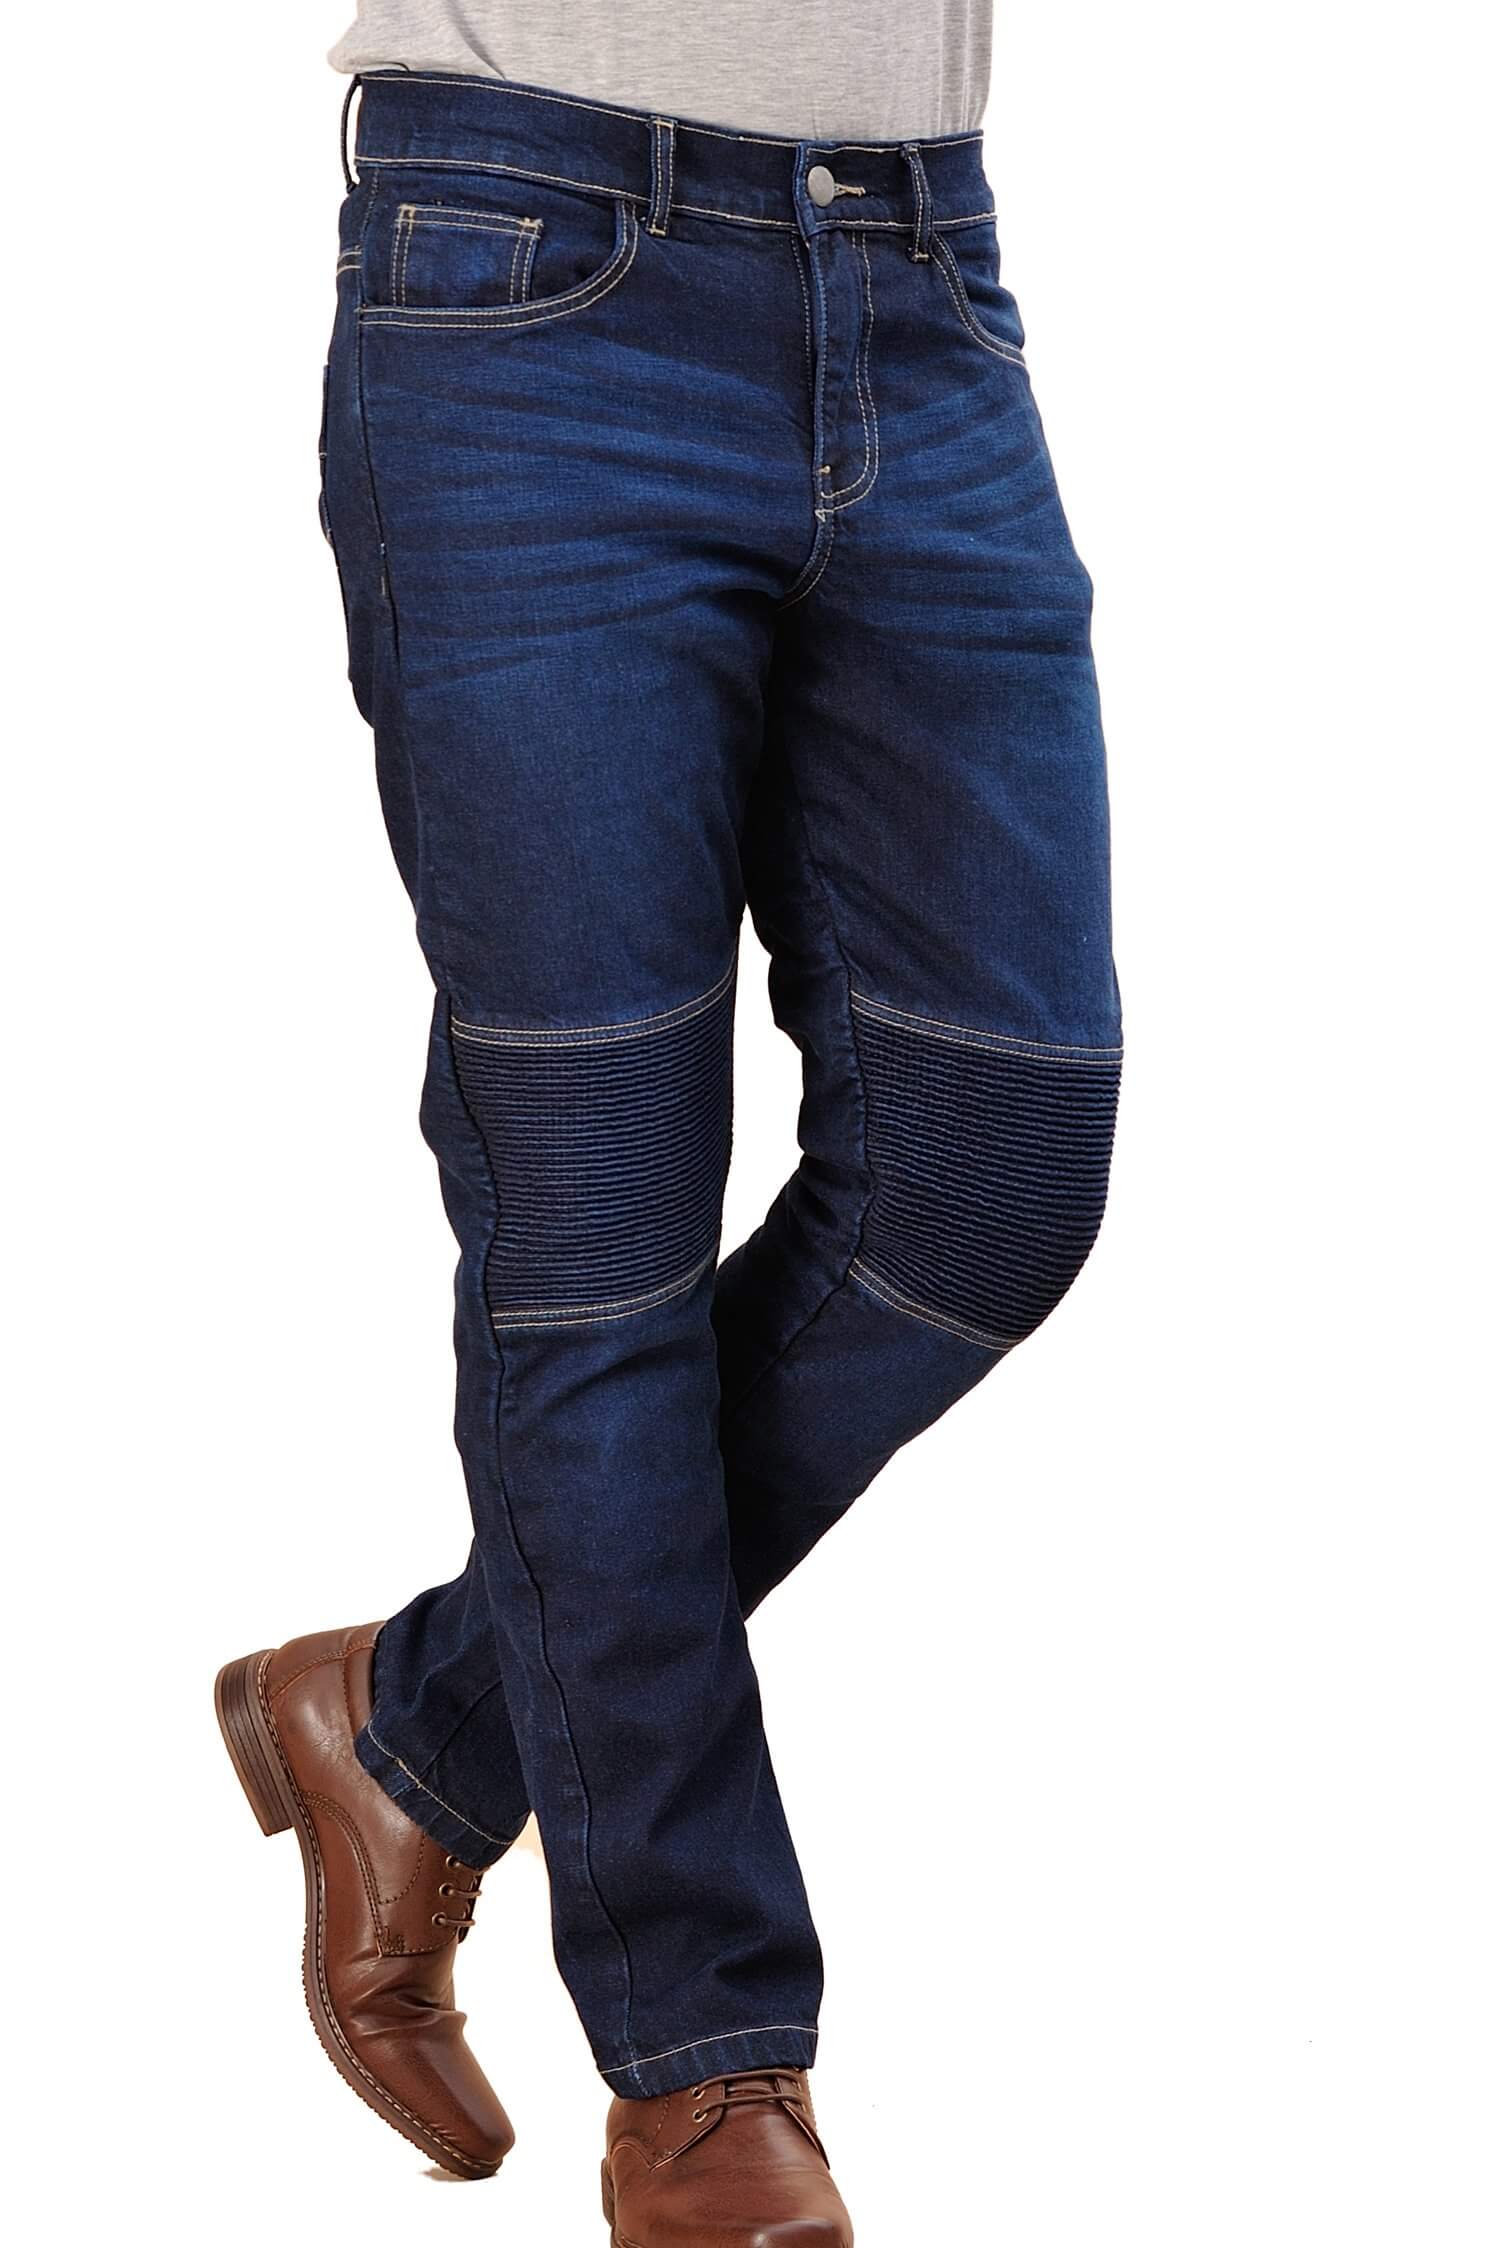 stretch-motorcycle-jeans-pants-8